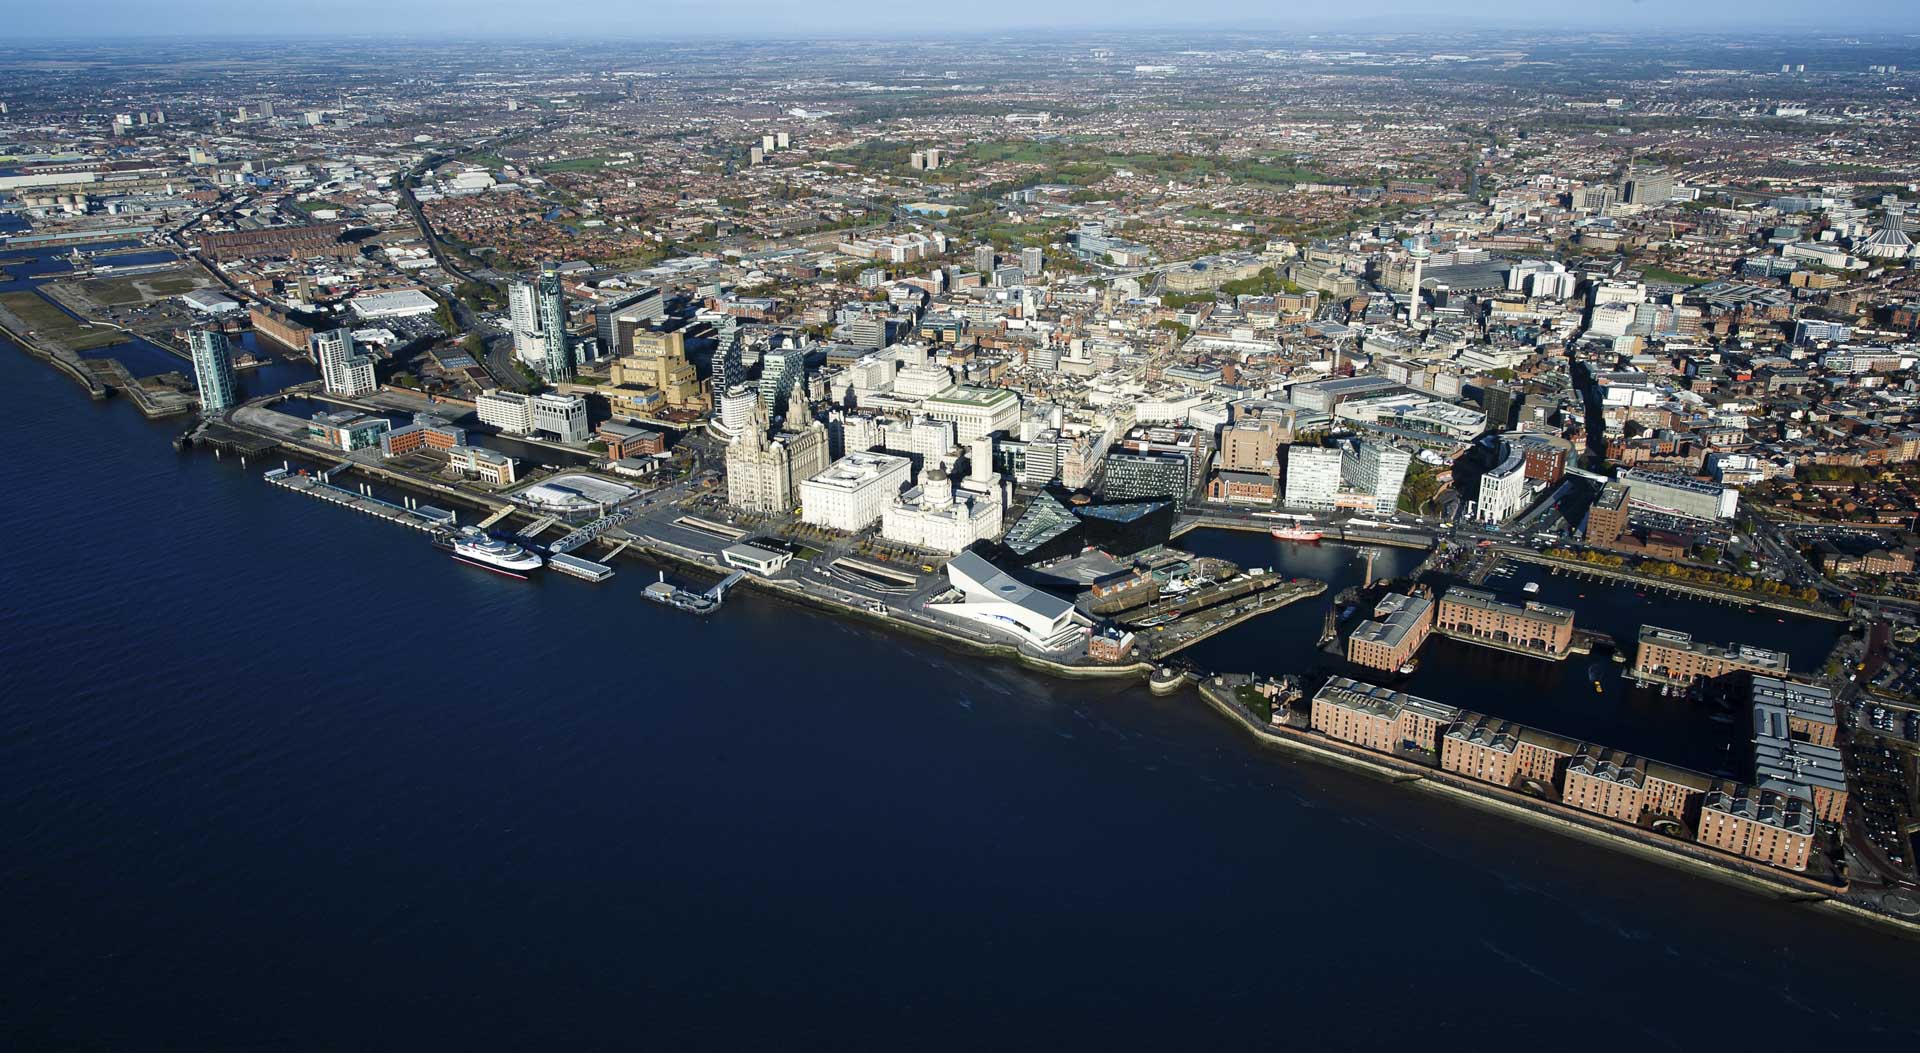 Dramatic aerial view of Liverpool with Mersey river in foreground